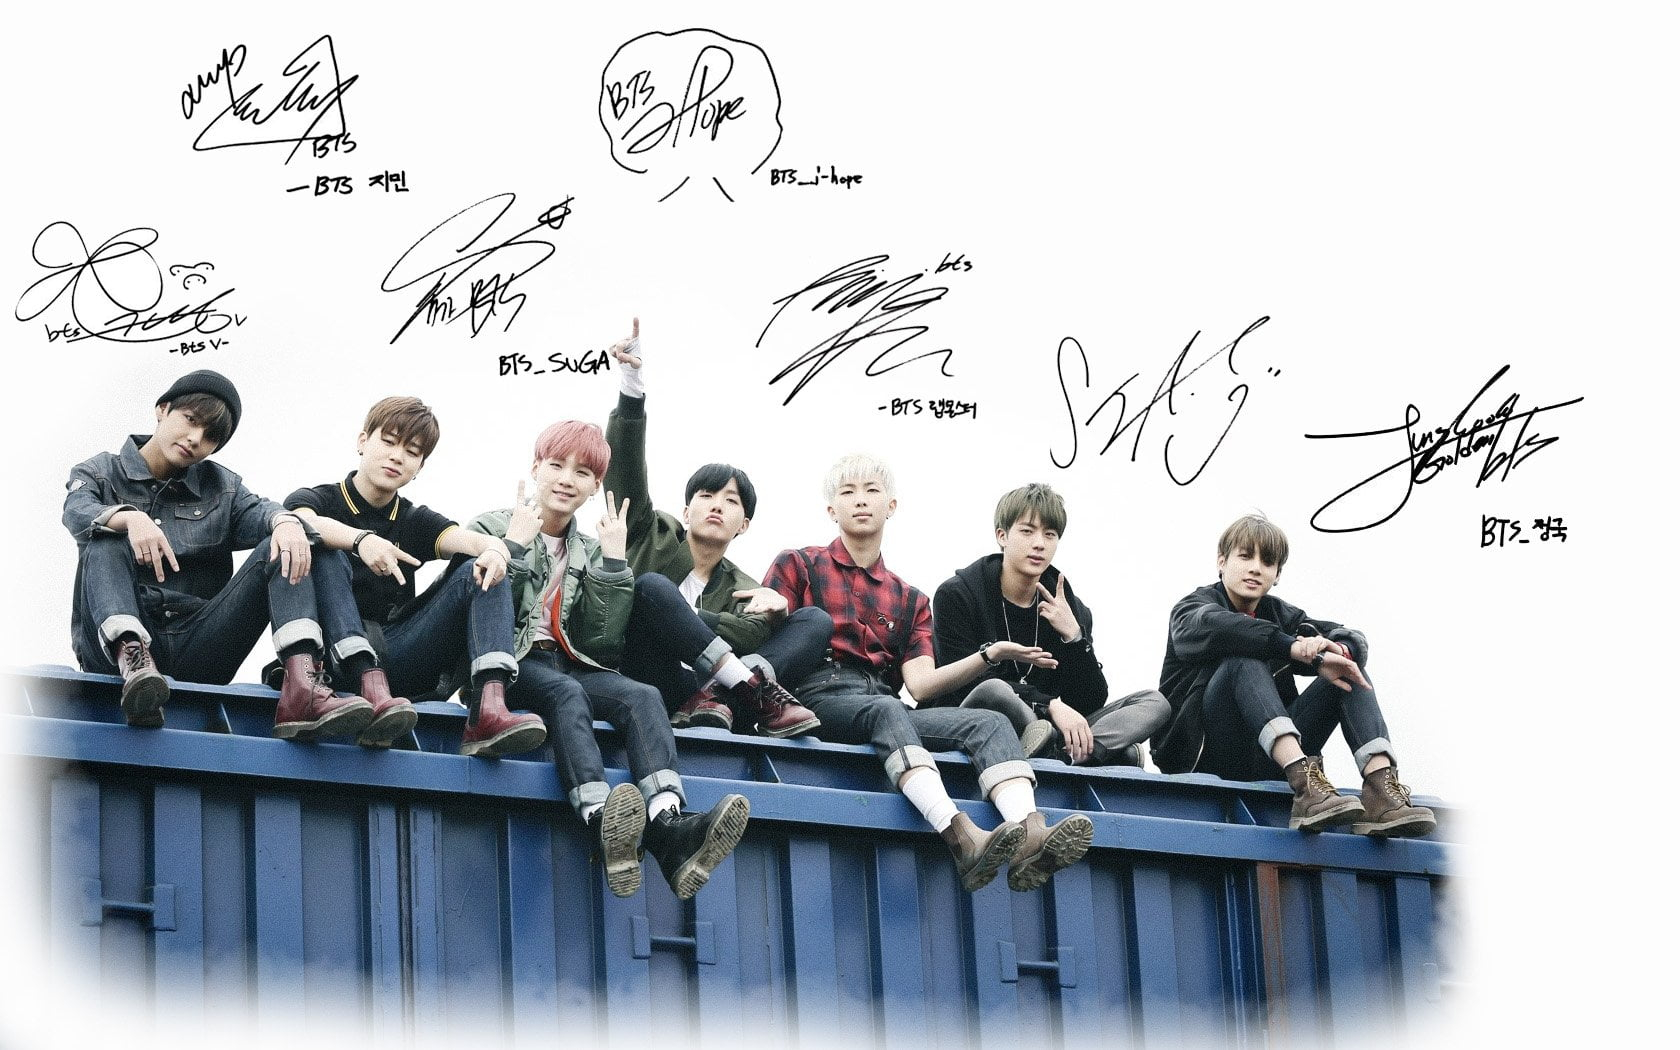 Music, BTS wallpaper, real people, sitting, group of people, casual clothing